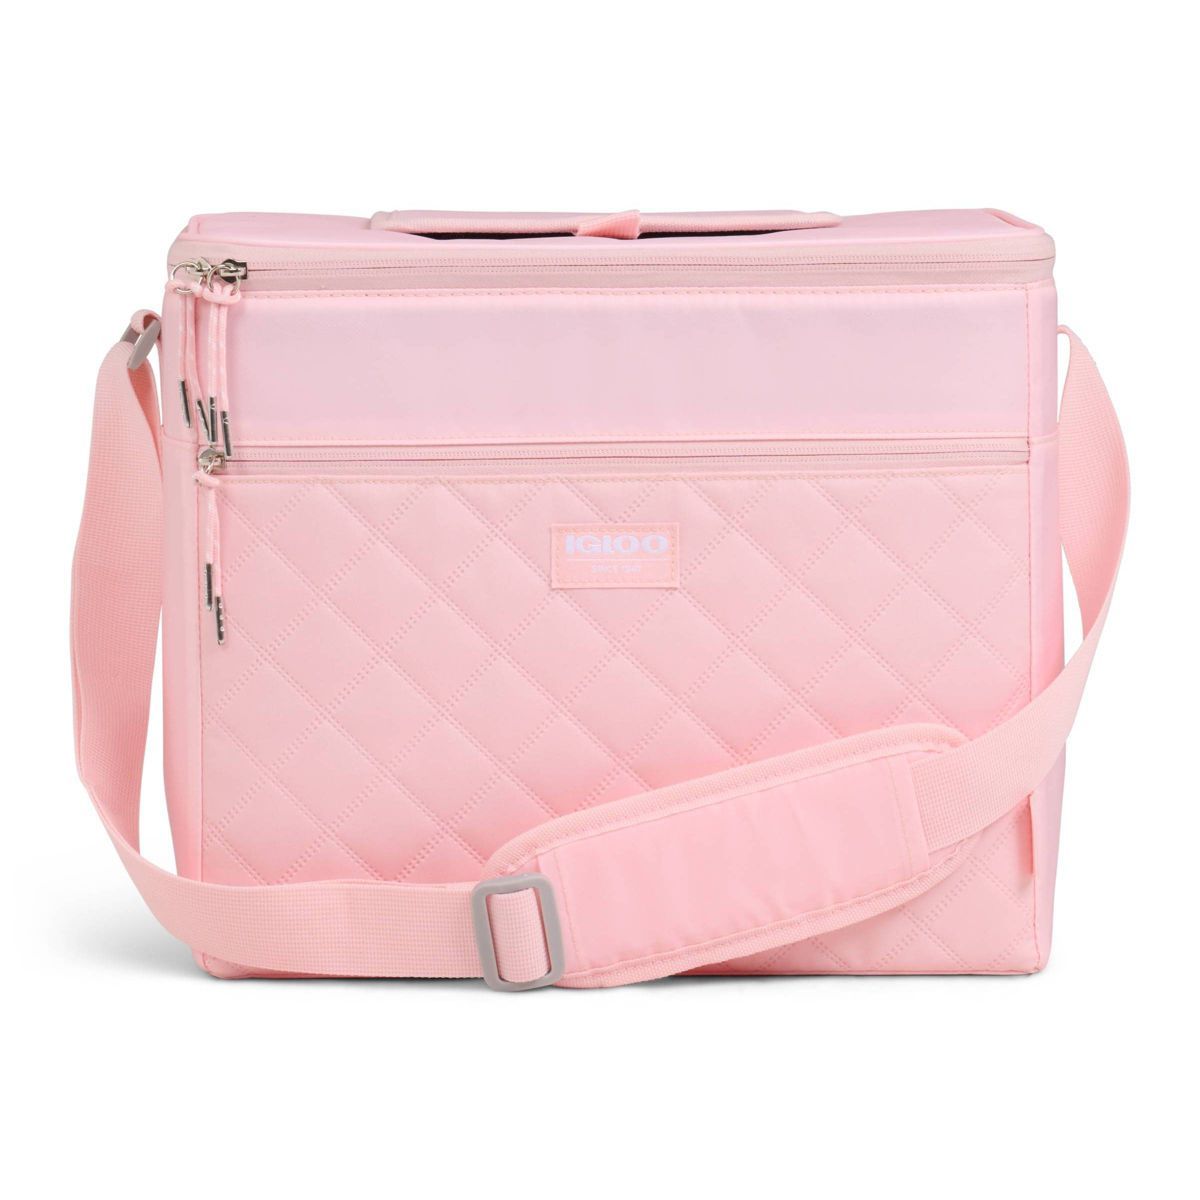 Igloo MaxCold Duo HLC 28 Soft-Sided Cooler - Rose Quartz | Target